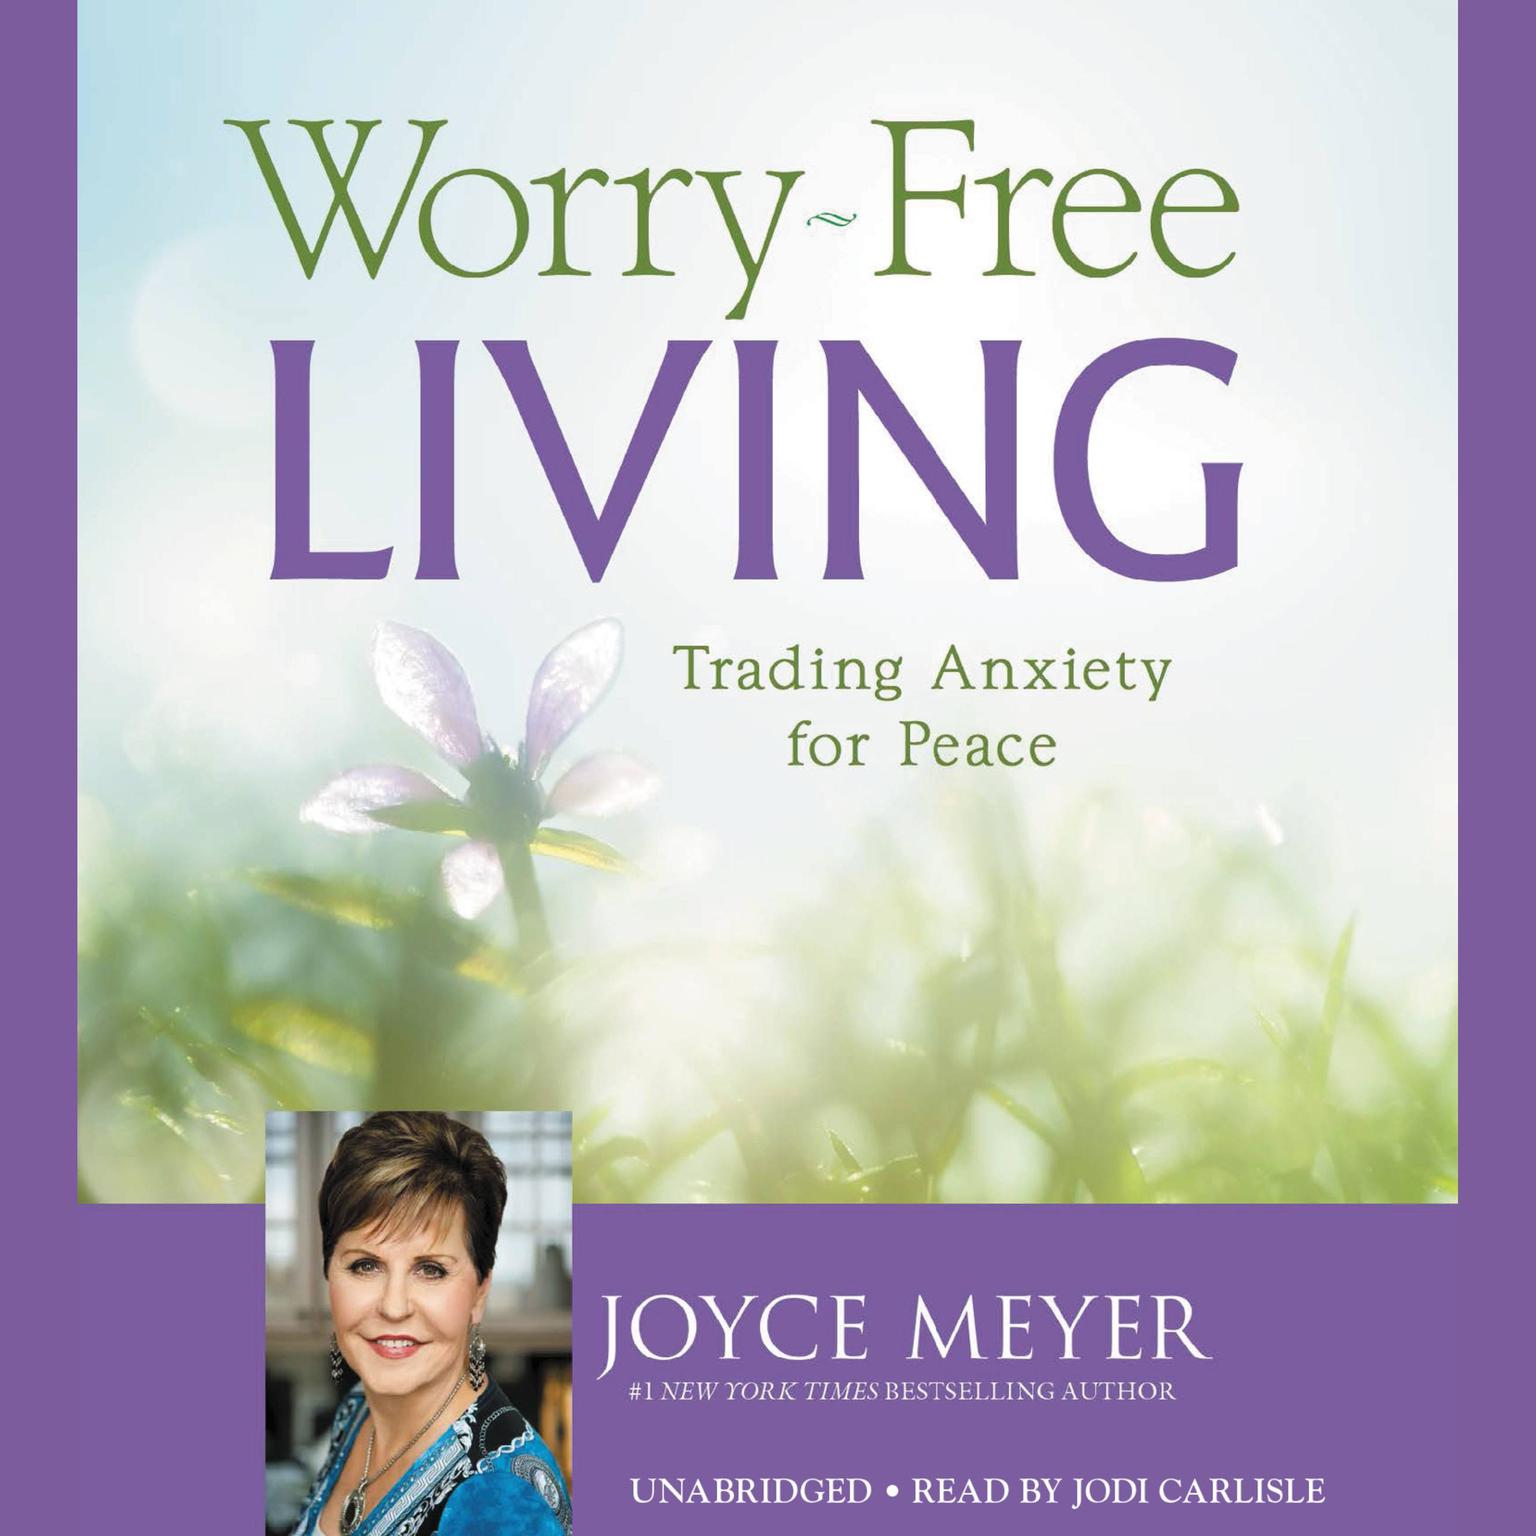 Worry-Free Living: Trading Anxiety for Peace Audiobook, by Joyce Meyer